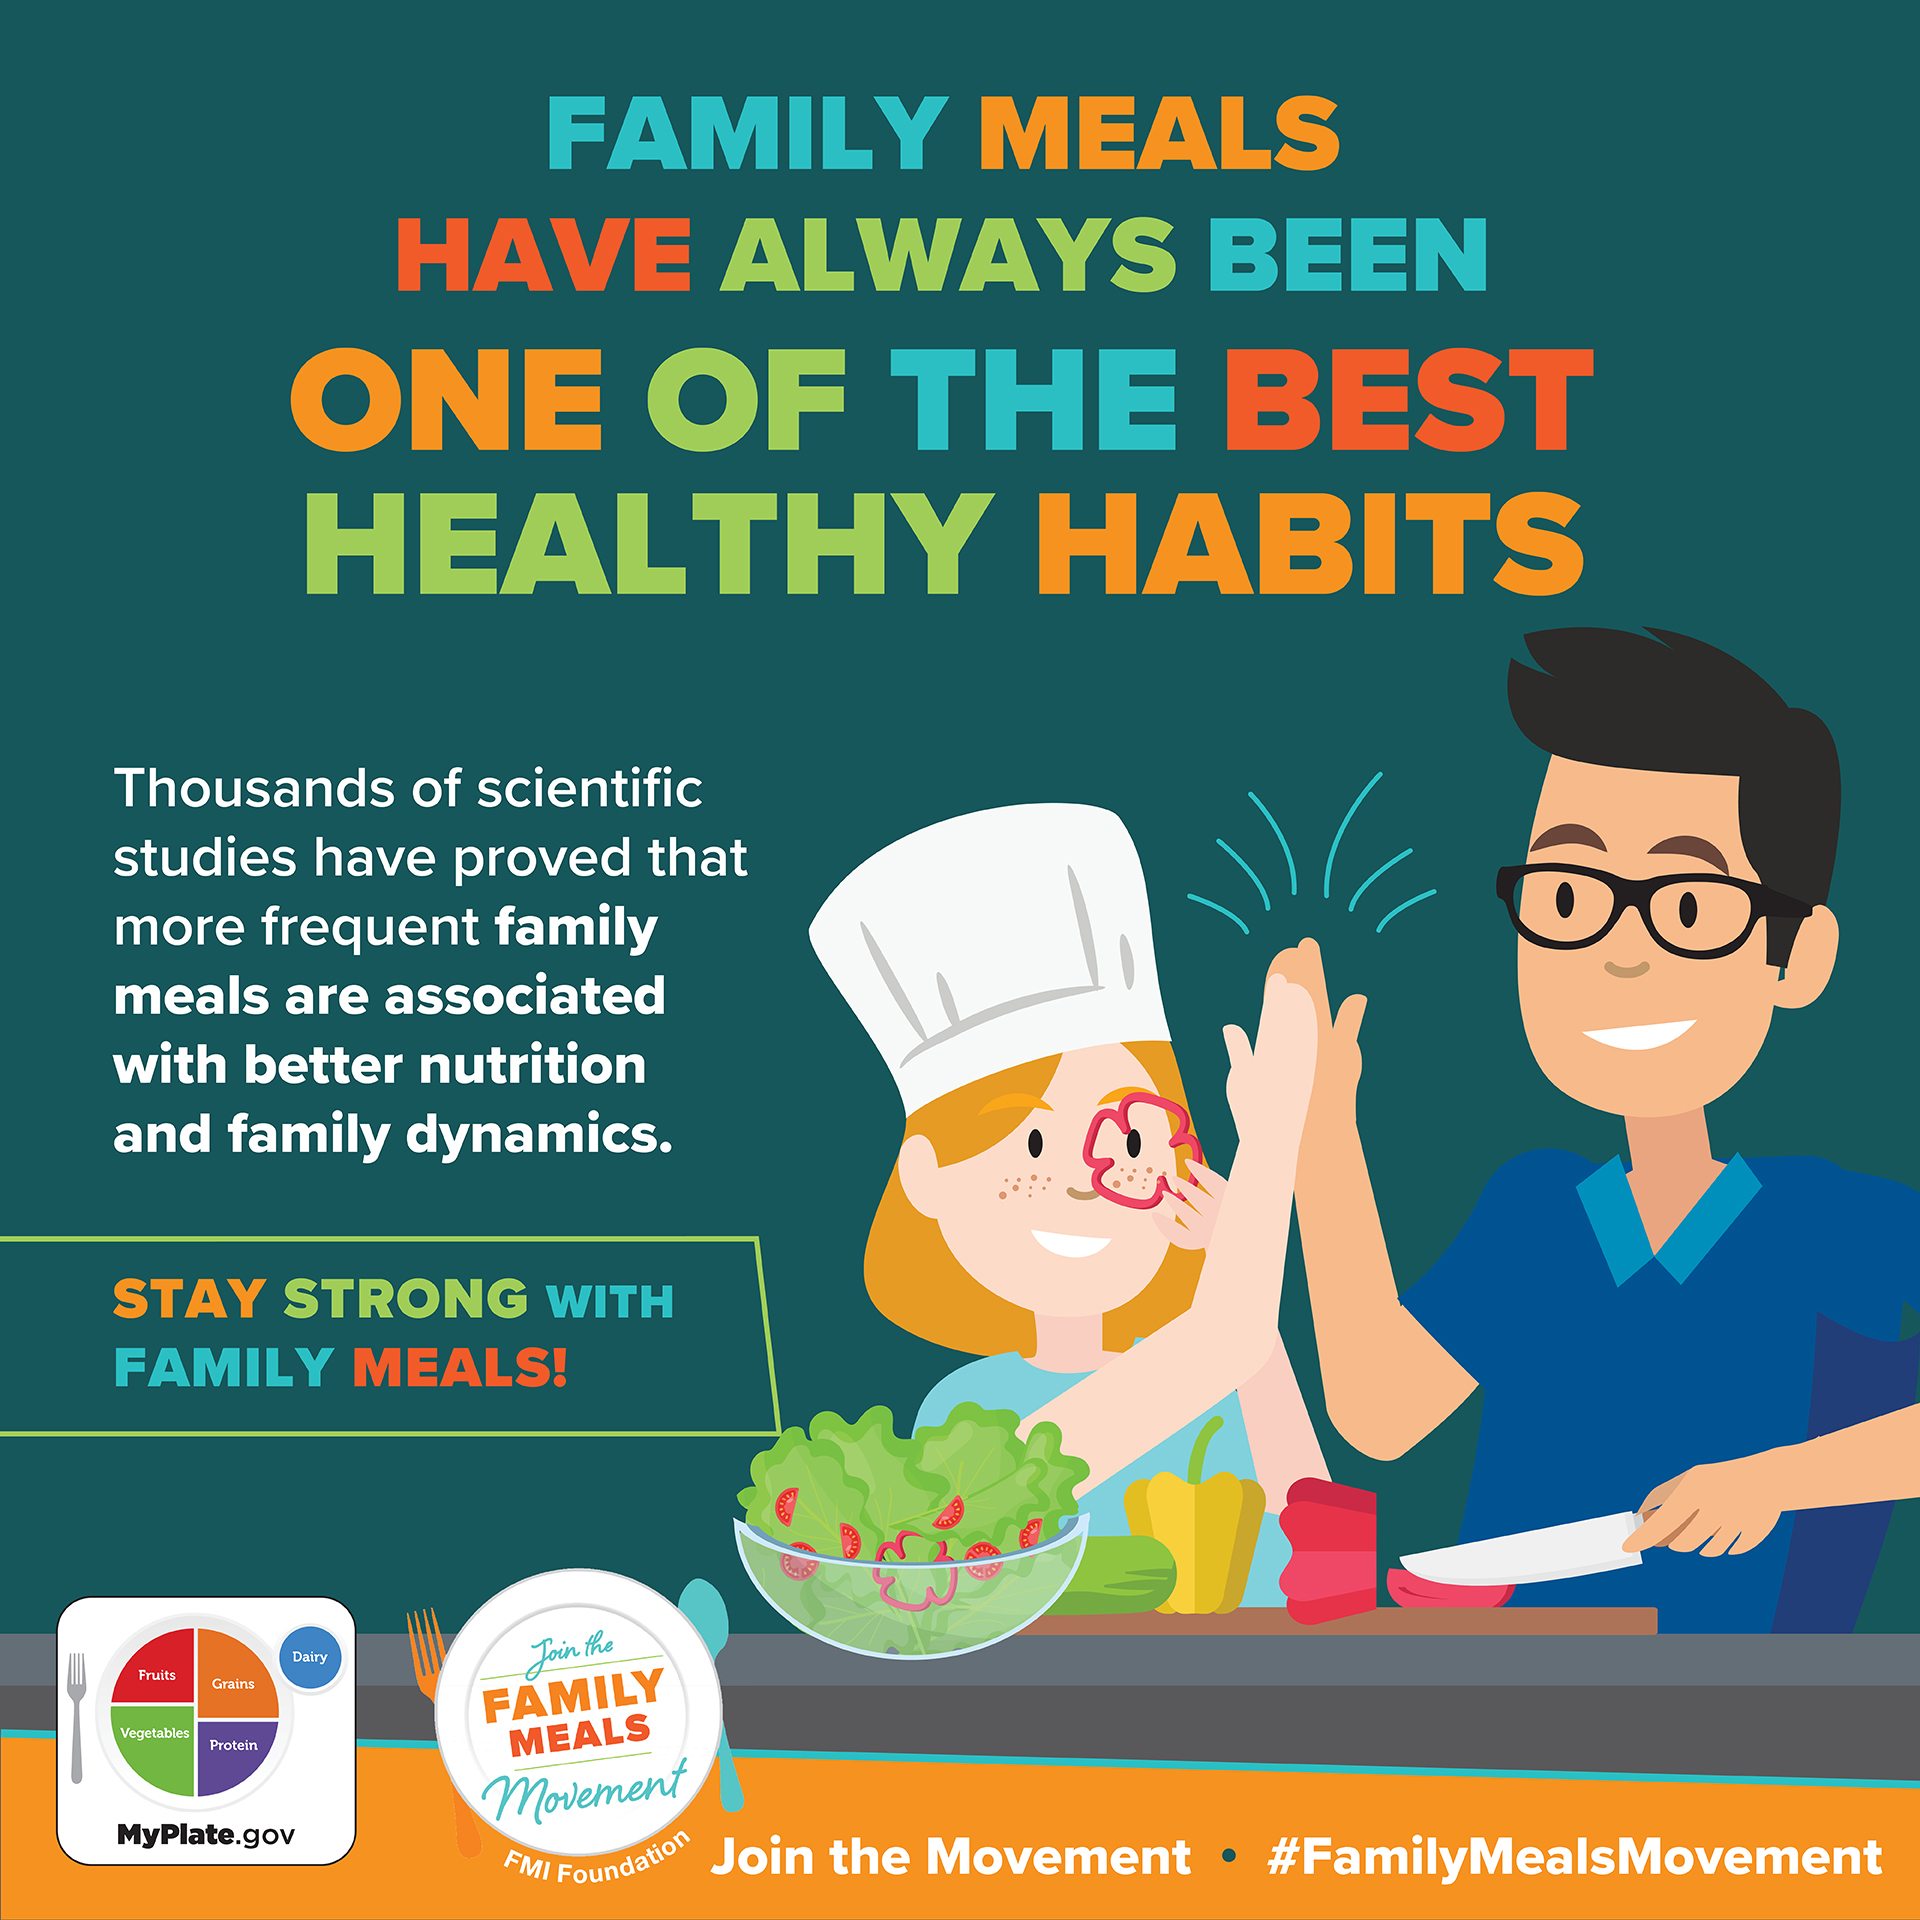 FMI | The Family Meals Movement is Growing